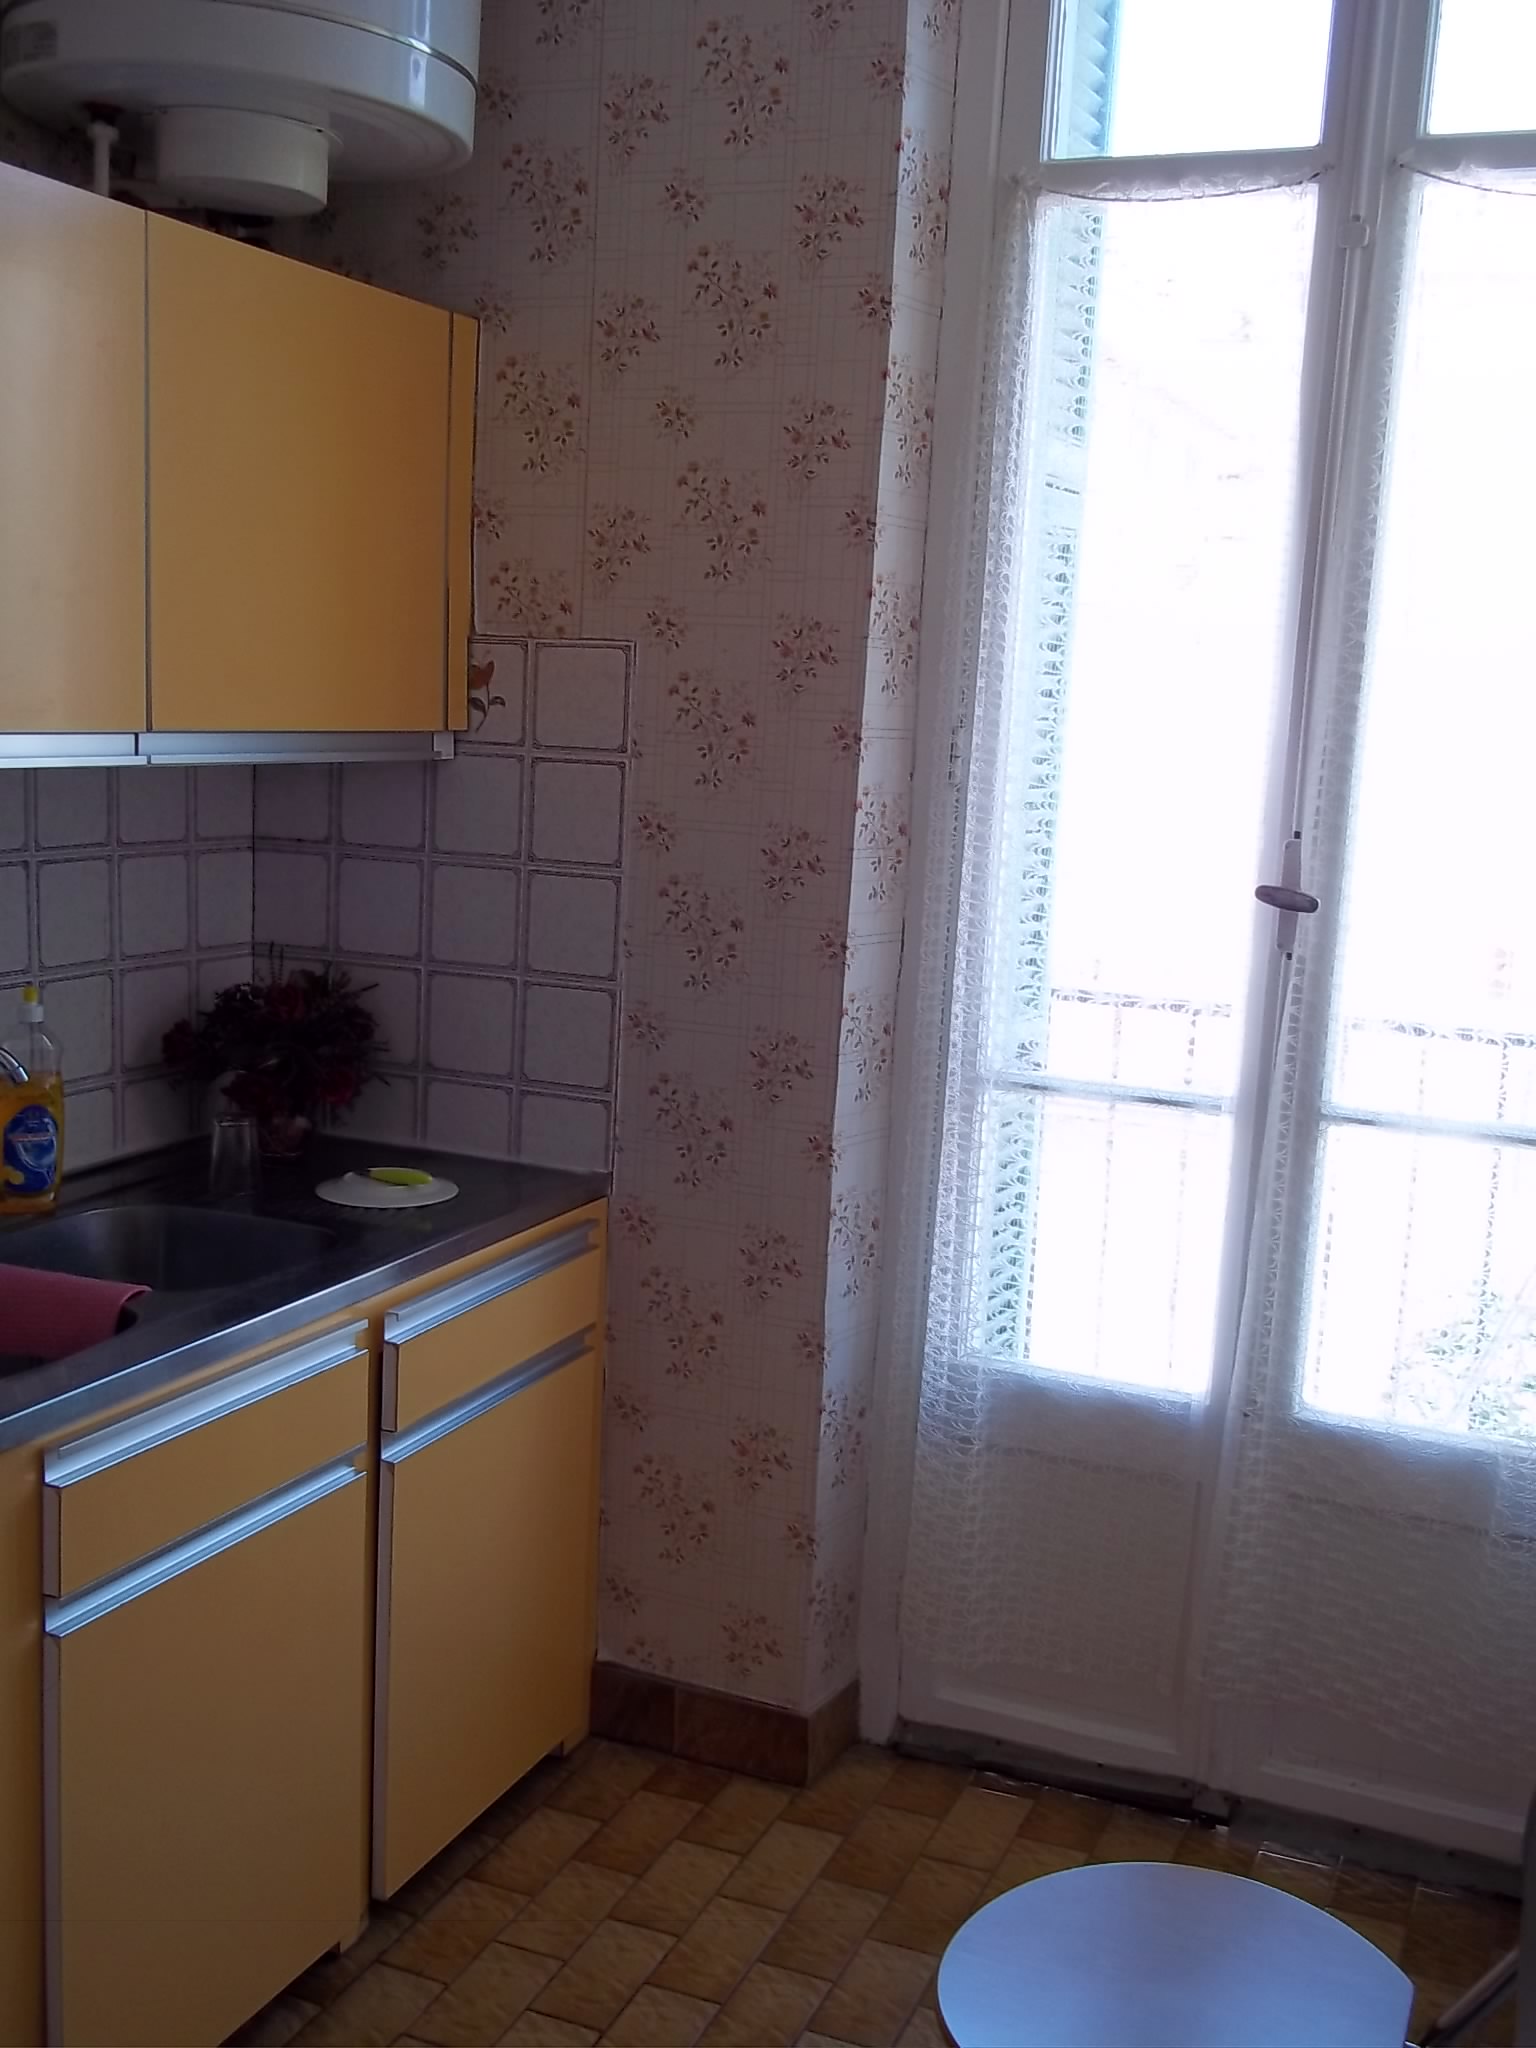 the kitchen has yellow cabinets and counter space